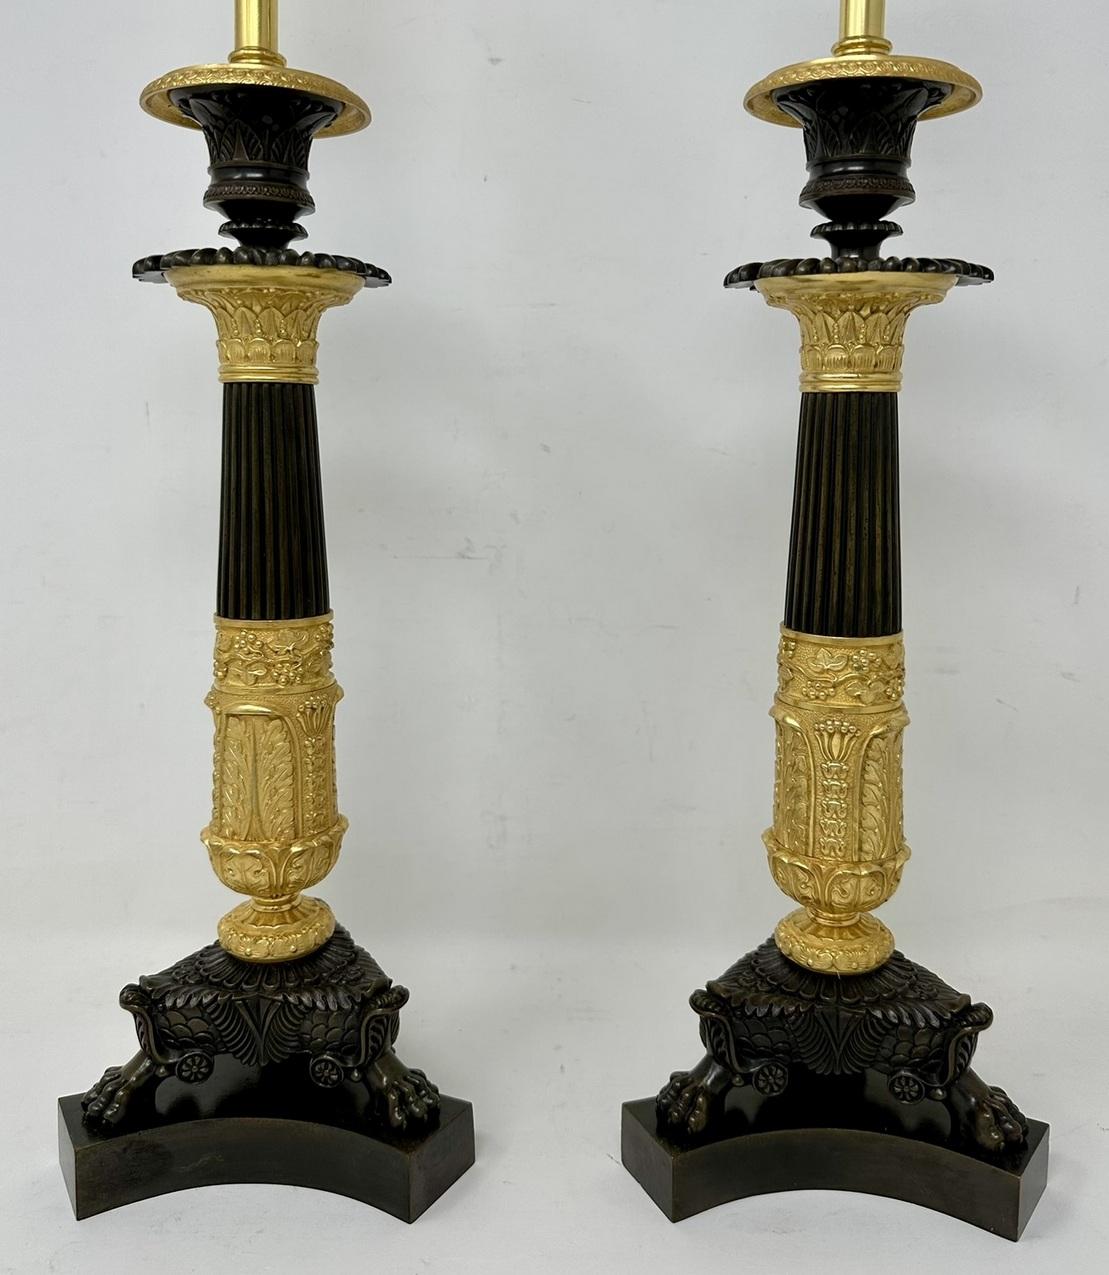 Antique Pair of French Doré Bronze Neoclassical Ormolu Gilt Candlesticks Lamps  In Good Condition For Sale In Dublin, Ireland